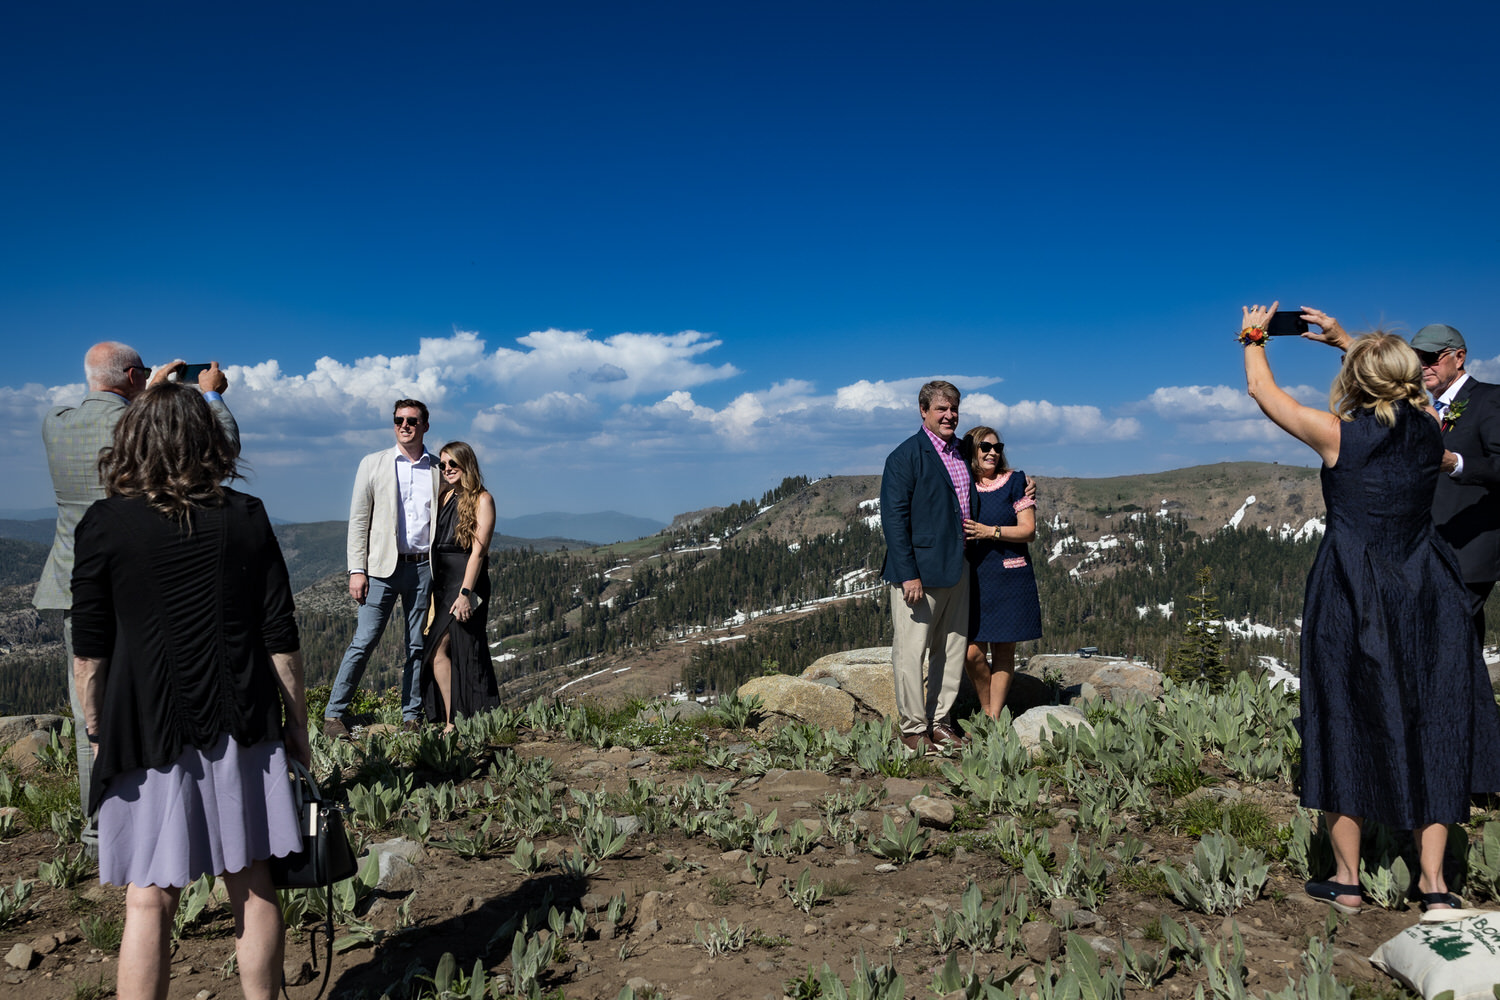 Wedding guests enjoy views of Donner Lake, Van Norden Meadow, and the surrounding landscape during a cocktail hour on Mt. Disney.